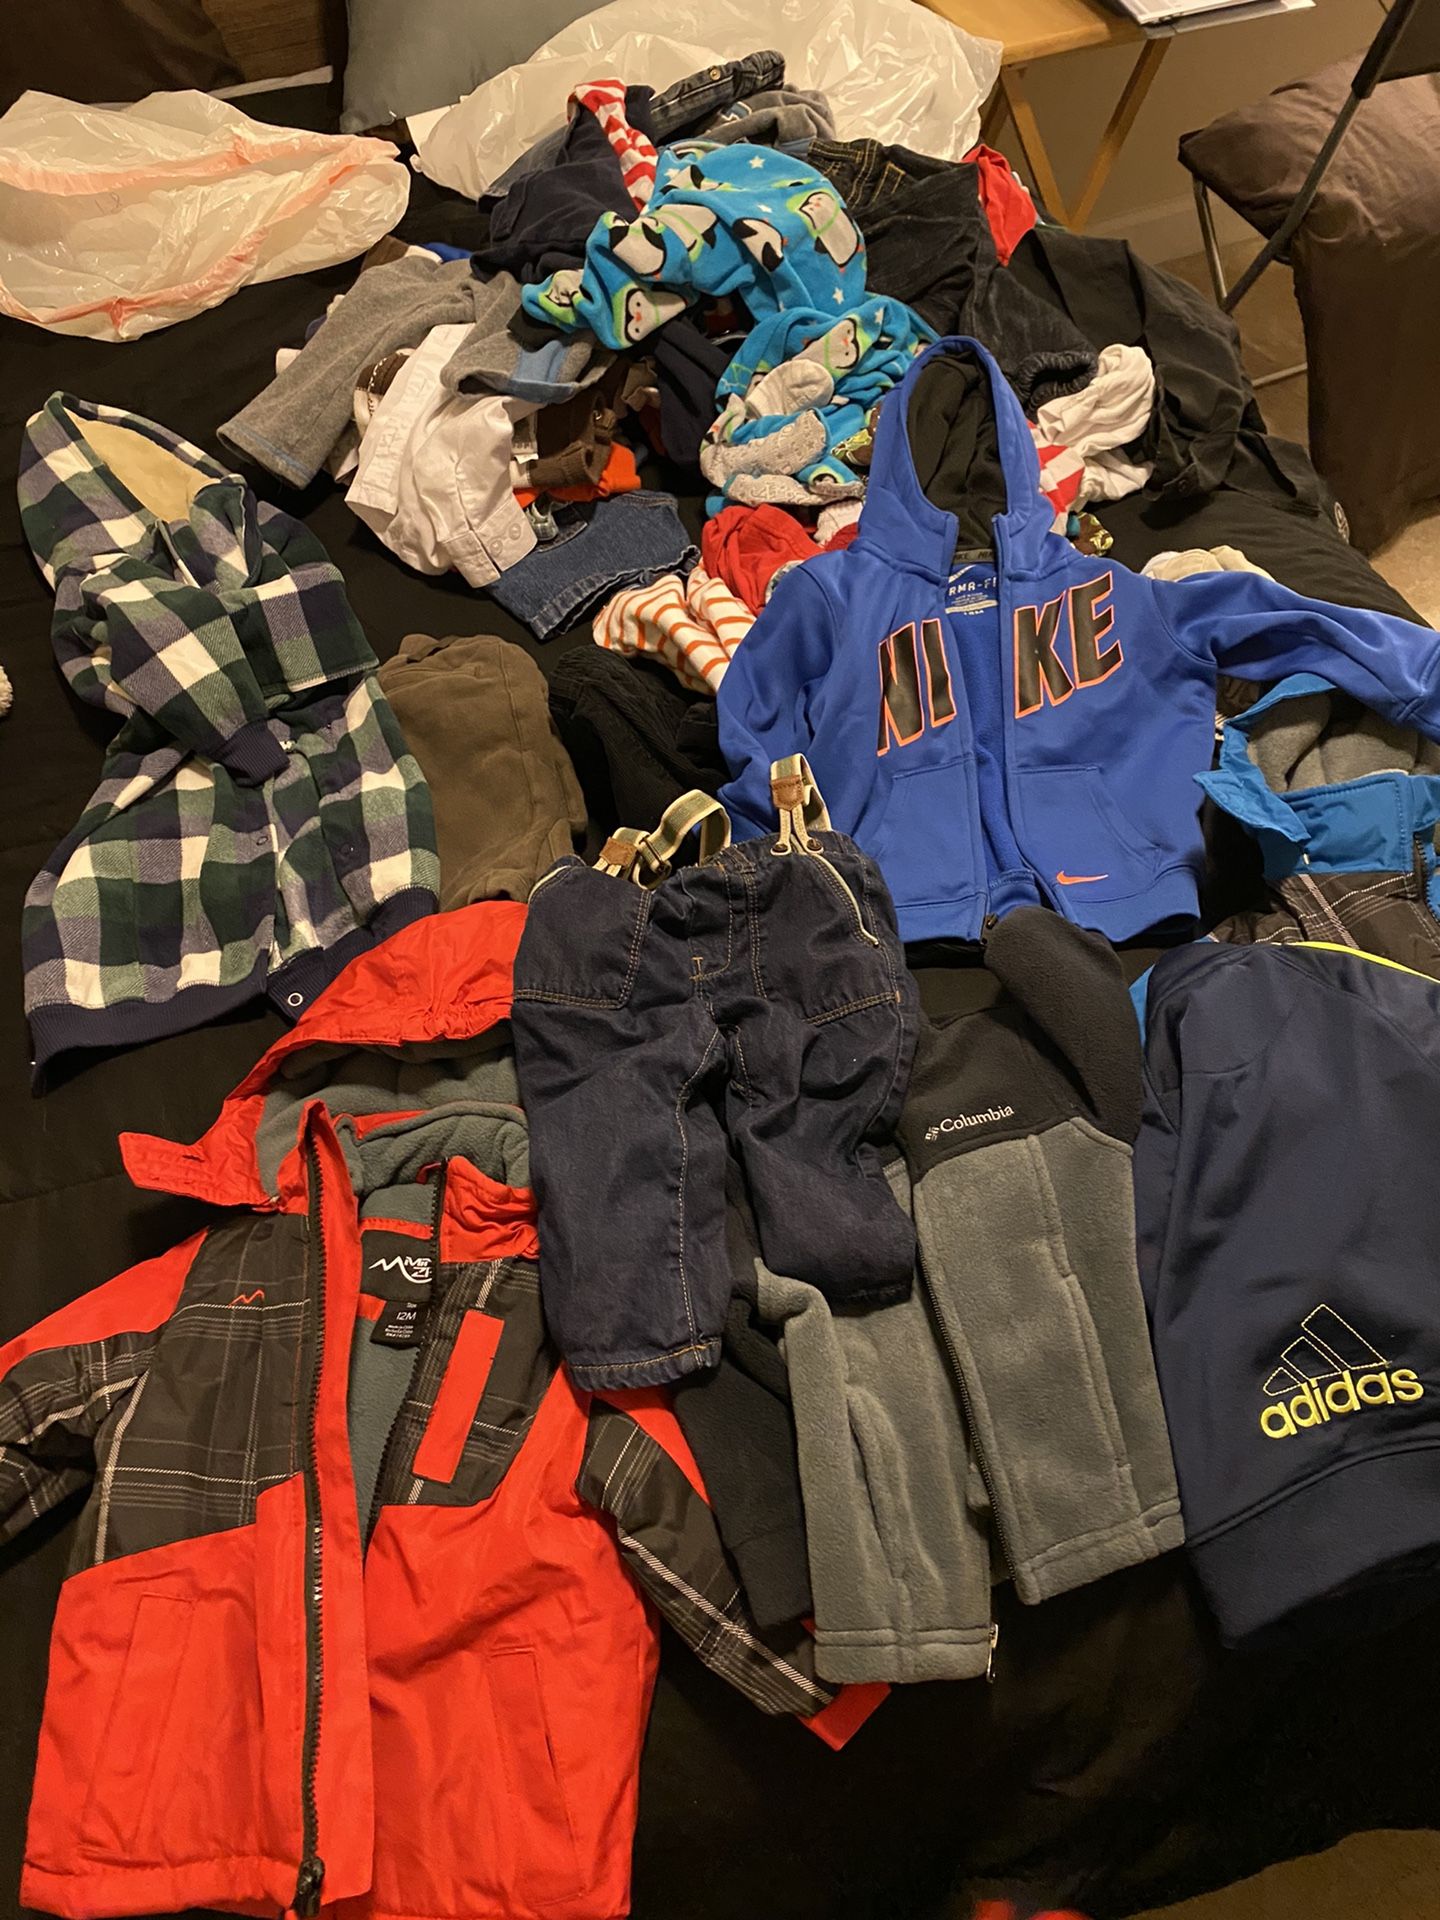 12-18month boy clothes Zara Adidas Nike and more not pictured